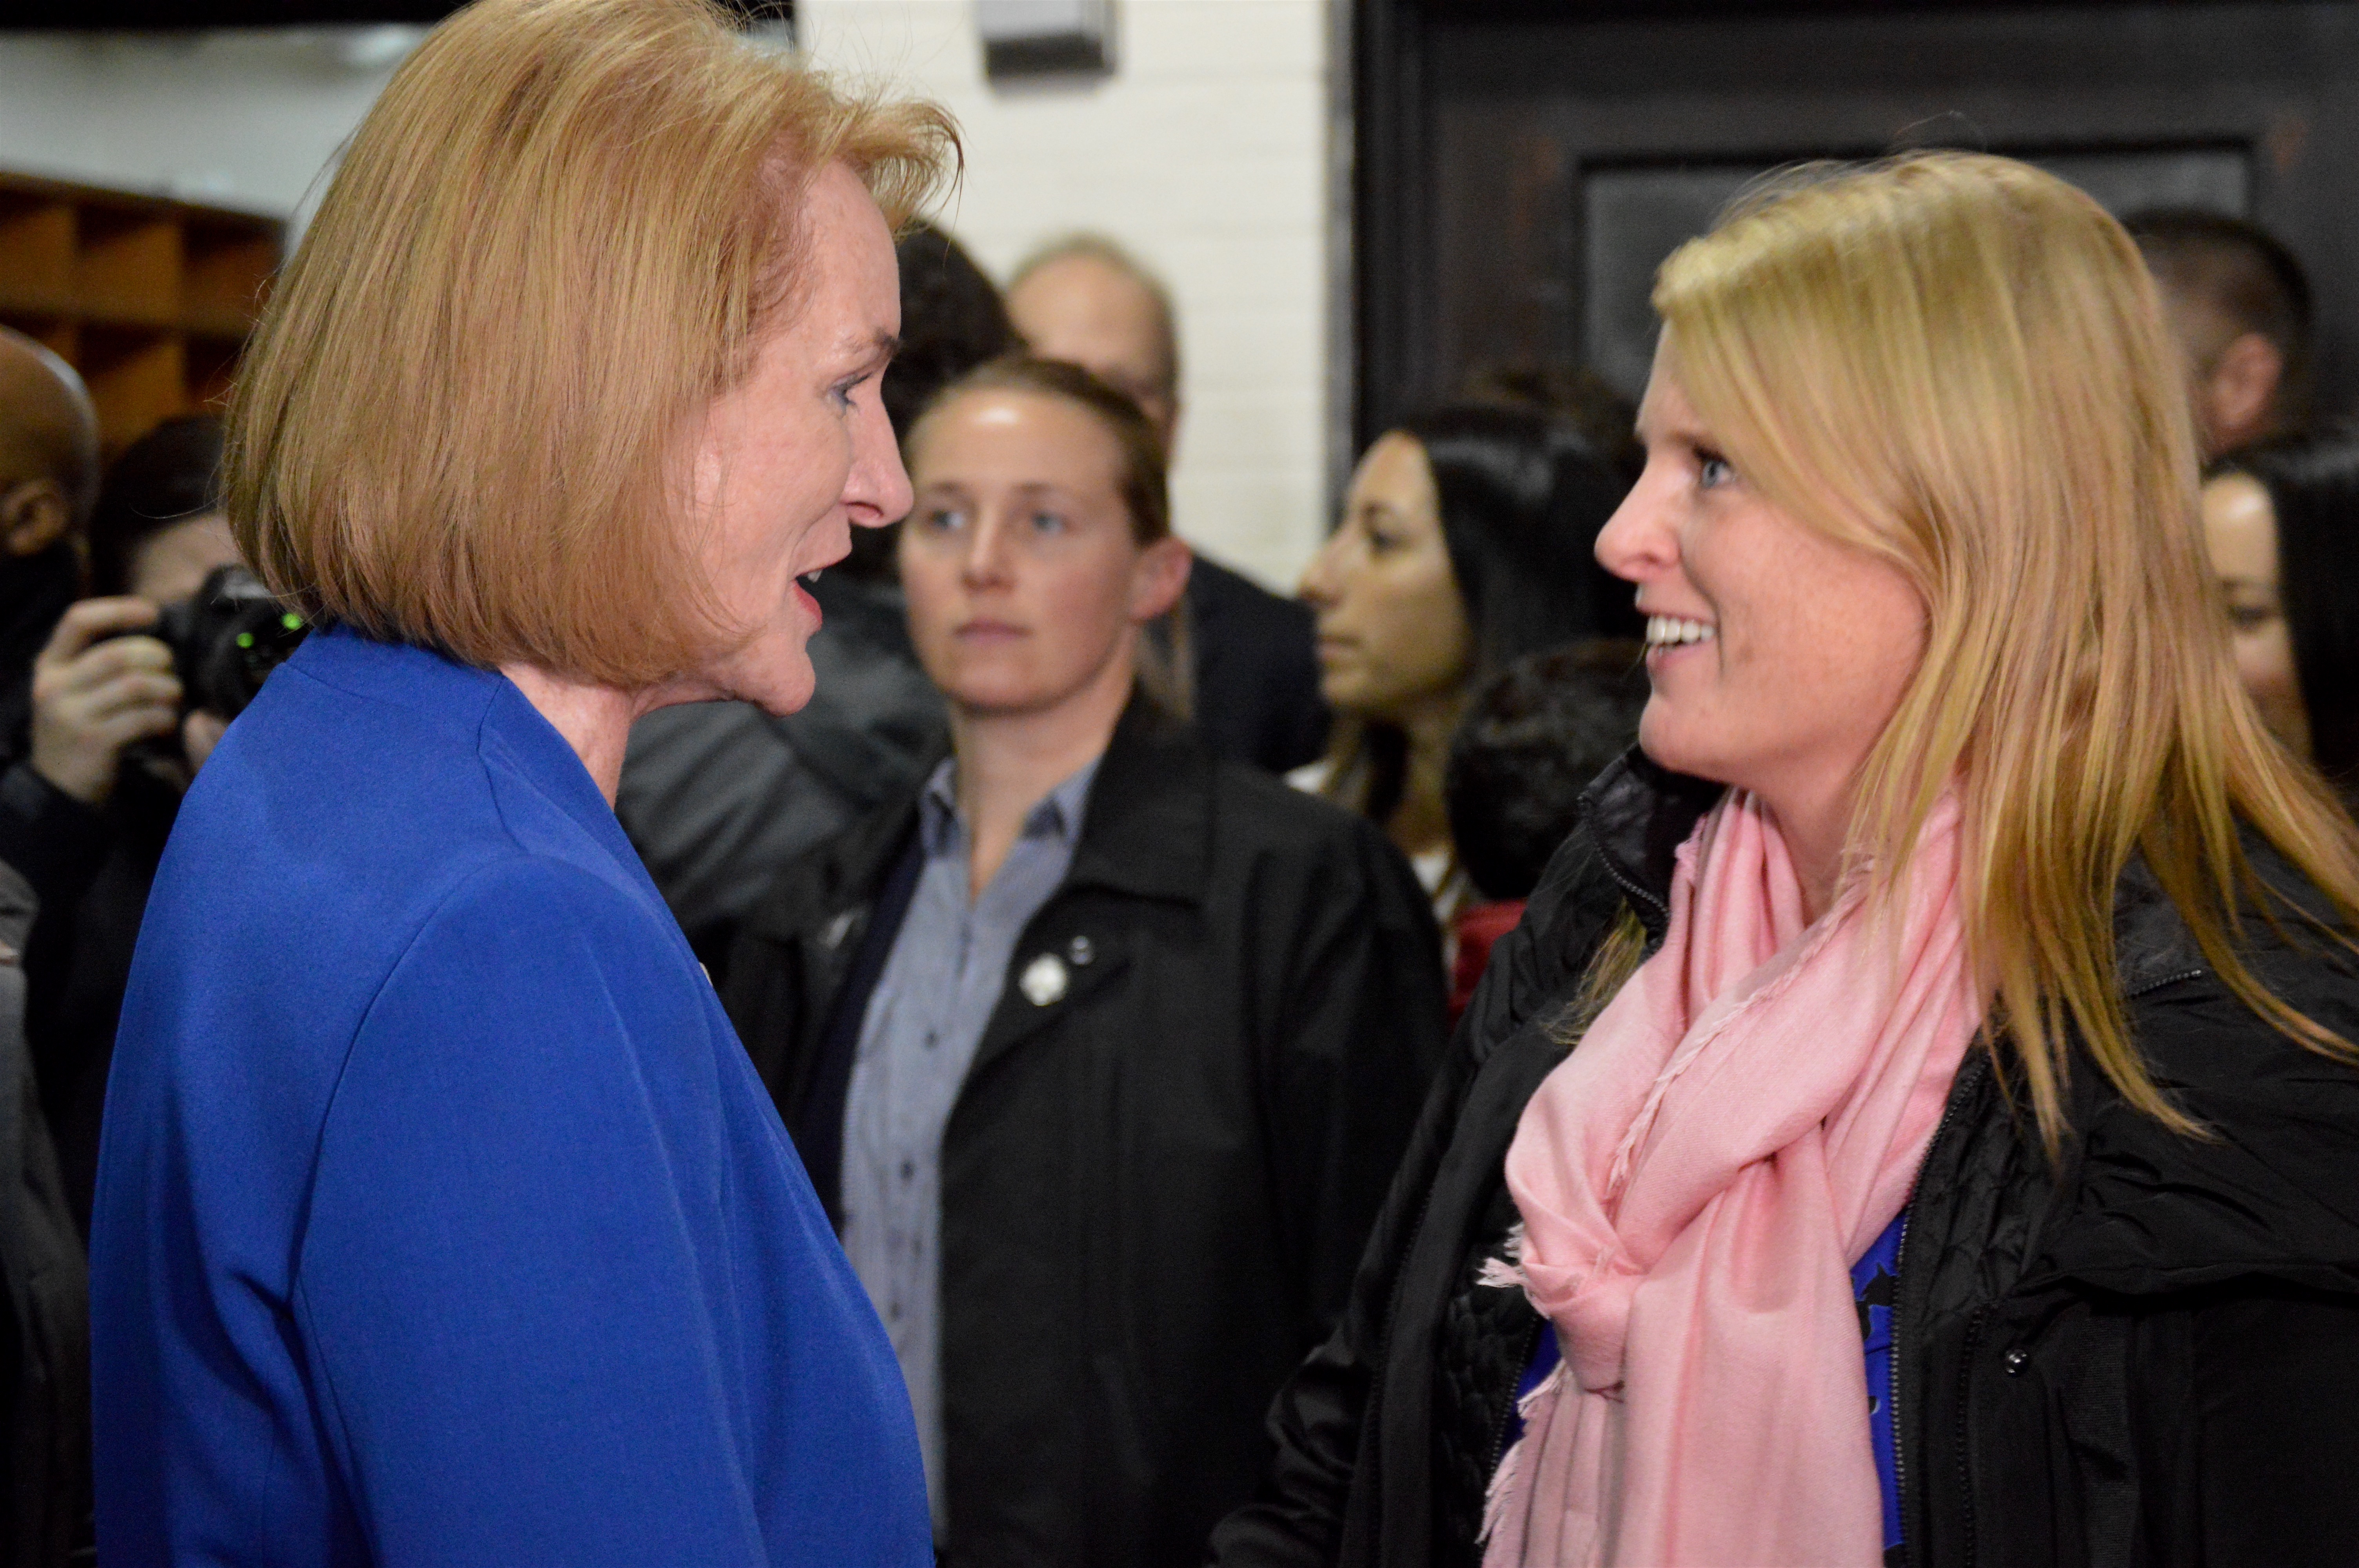 Durkan took time to meet constituents before dashing off to her next stop